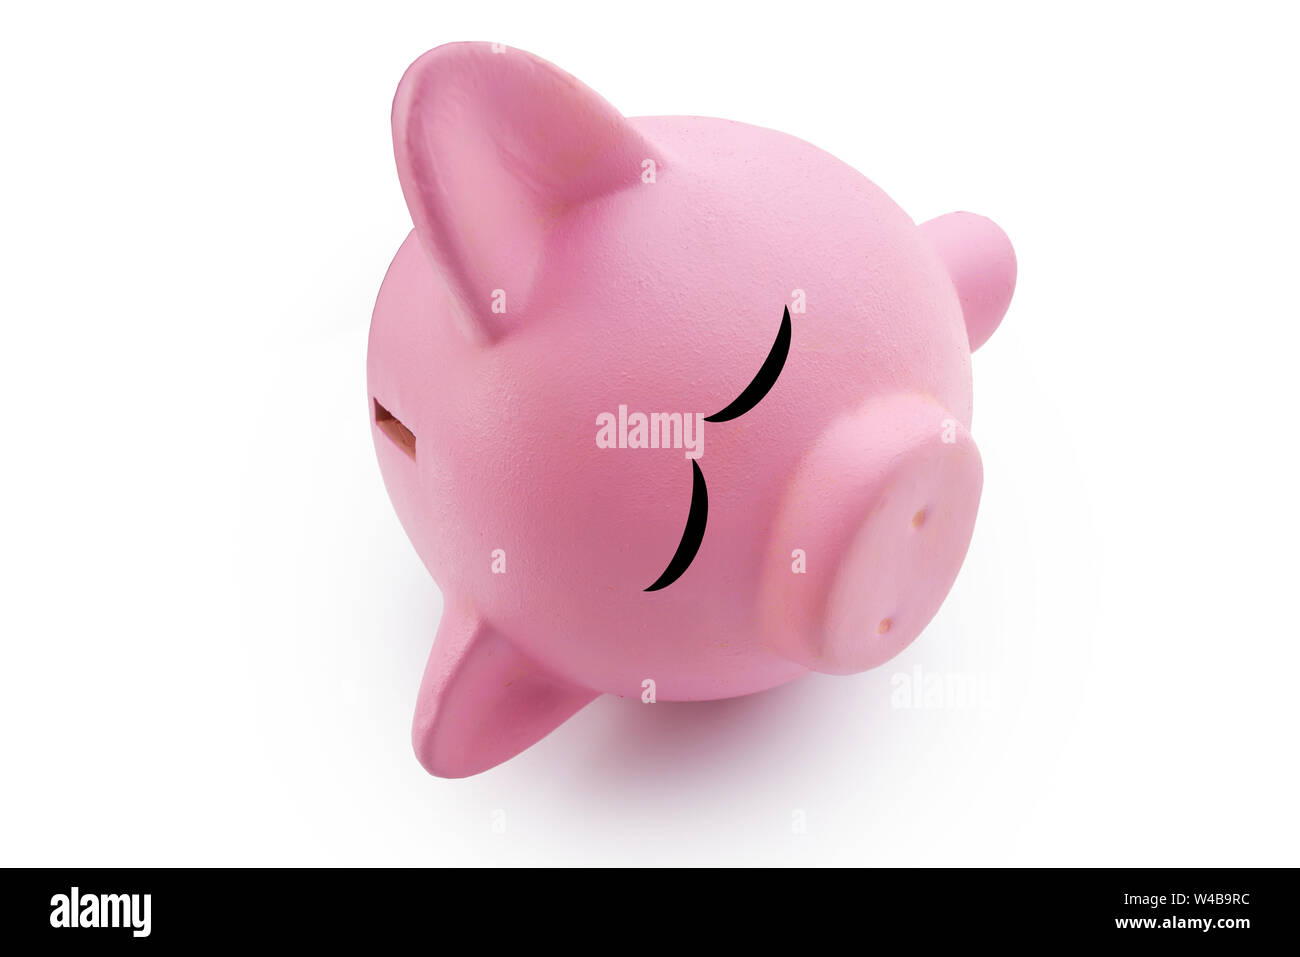 Piggy bank sleeping or dead isolated on white Stock Photo